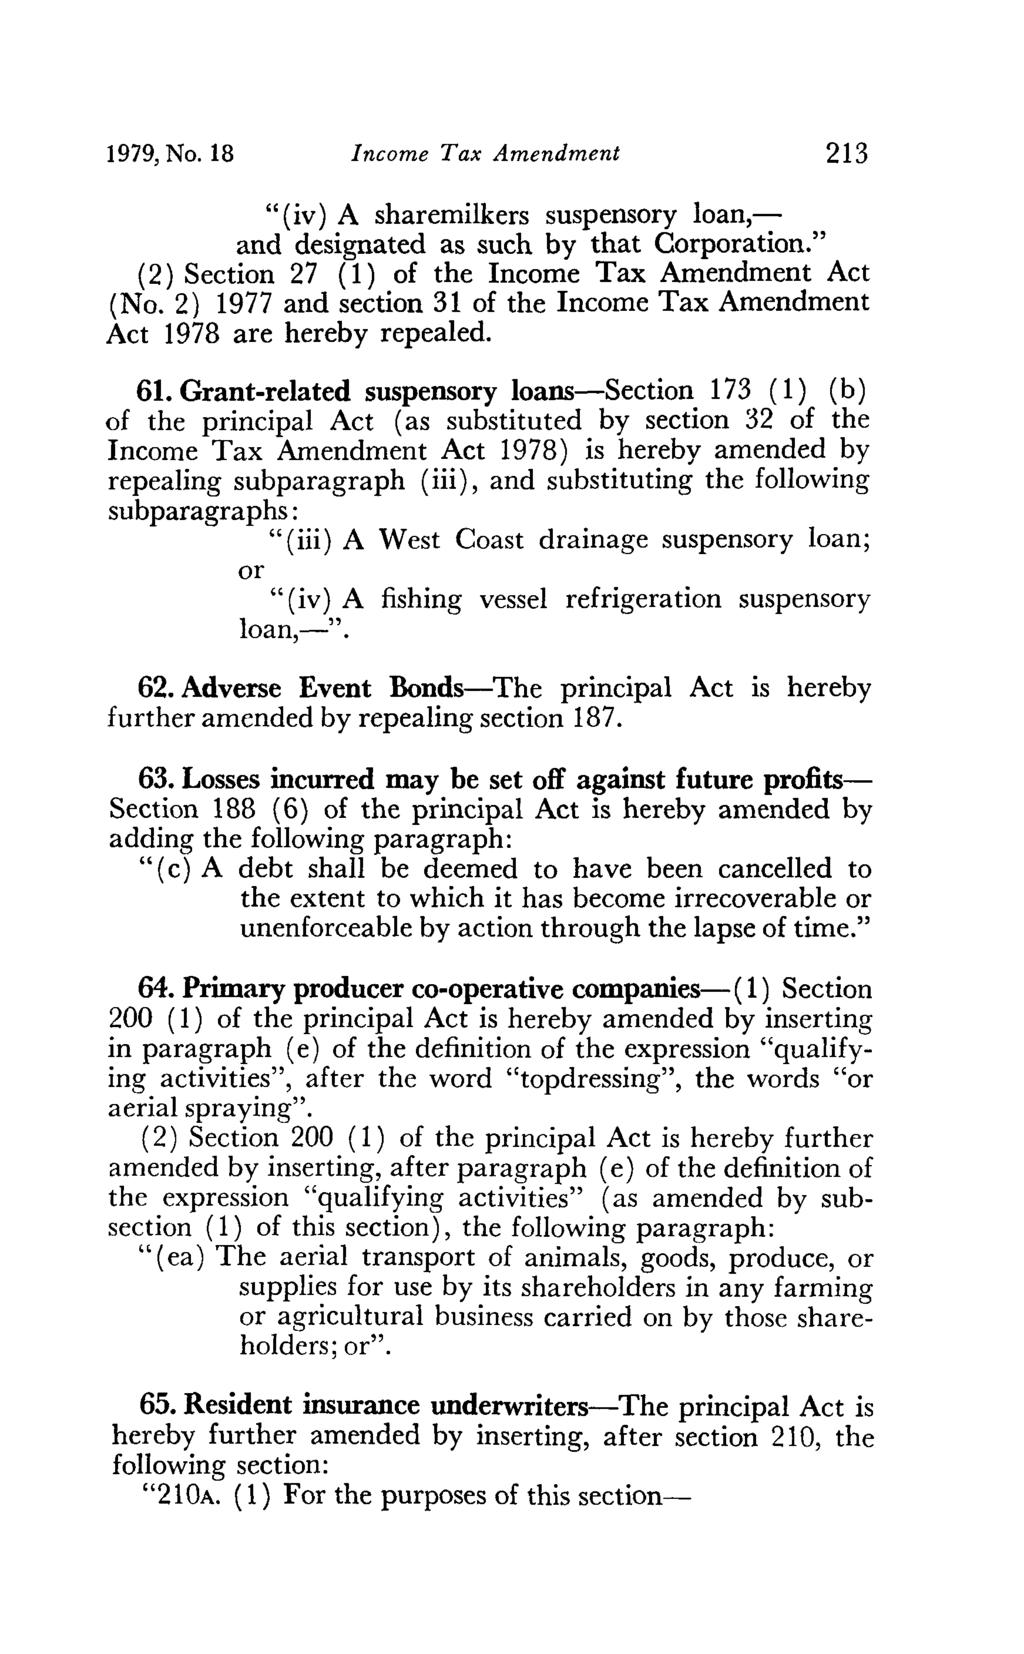 1979, No. 18 Income Tax Amendment 213 " (iv) A sharemilkers suspensory loan, and designated as such by that Corporation." (2) Section 27 (1) of the Income Tax Amendment Act (No.